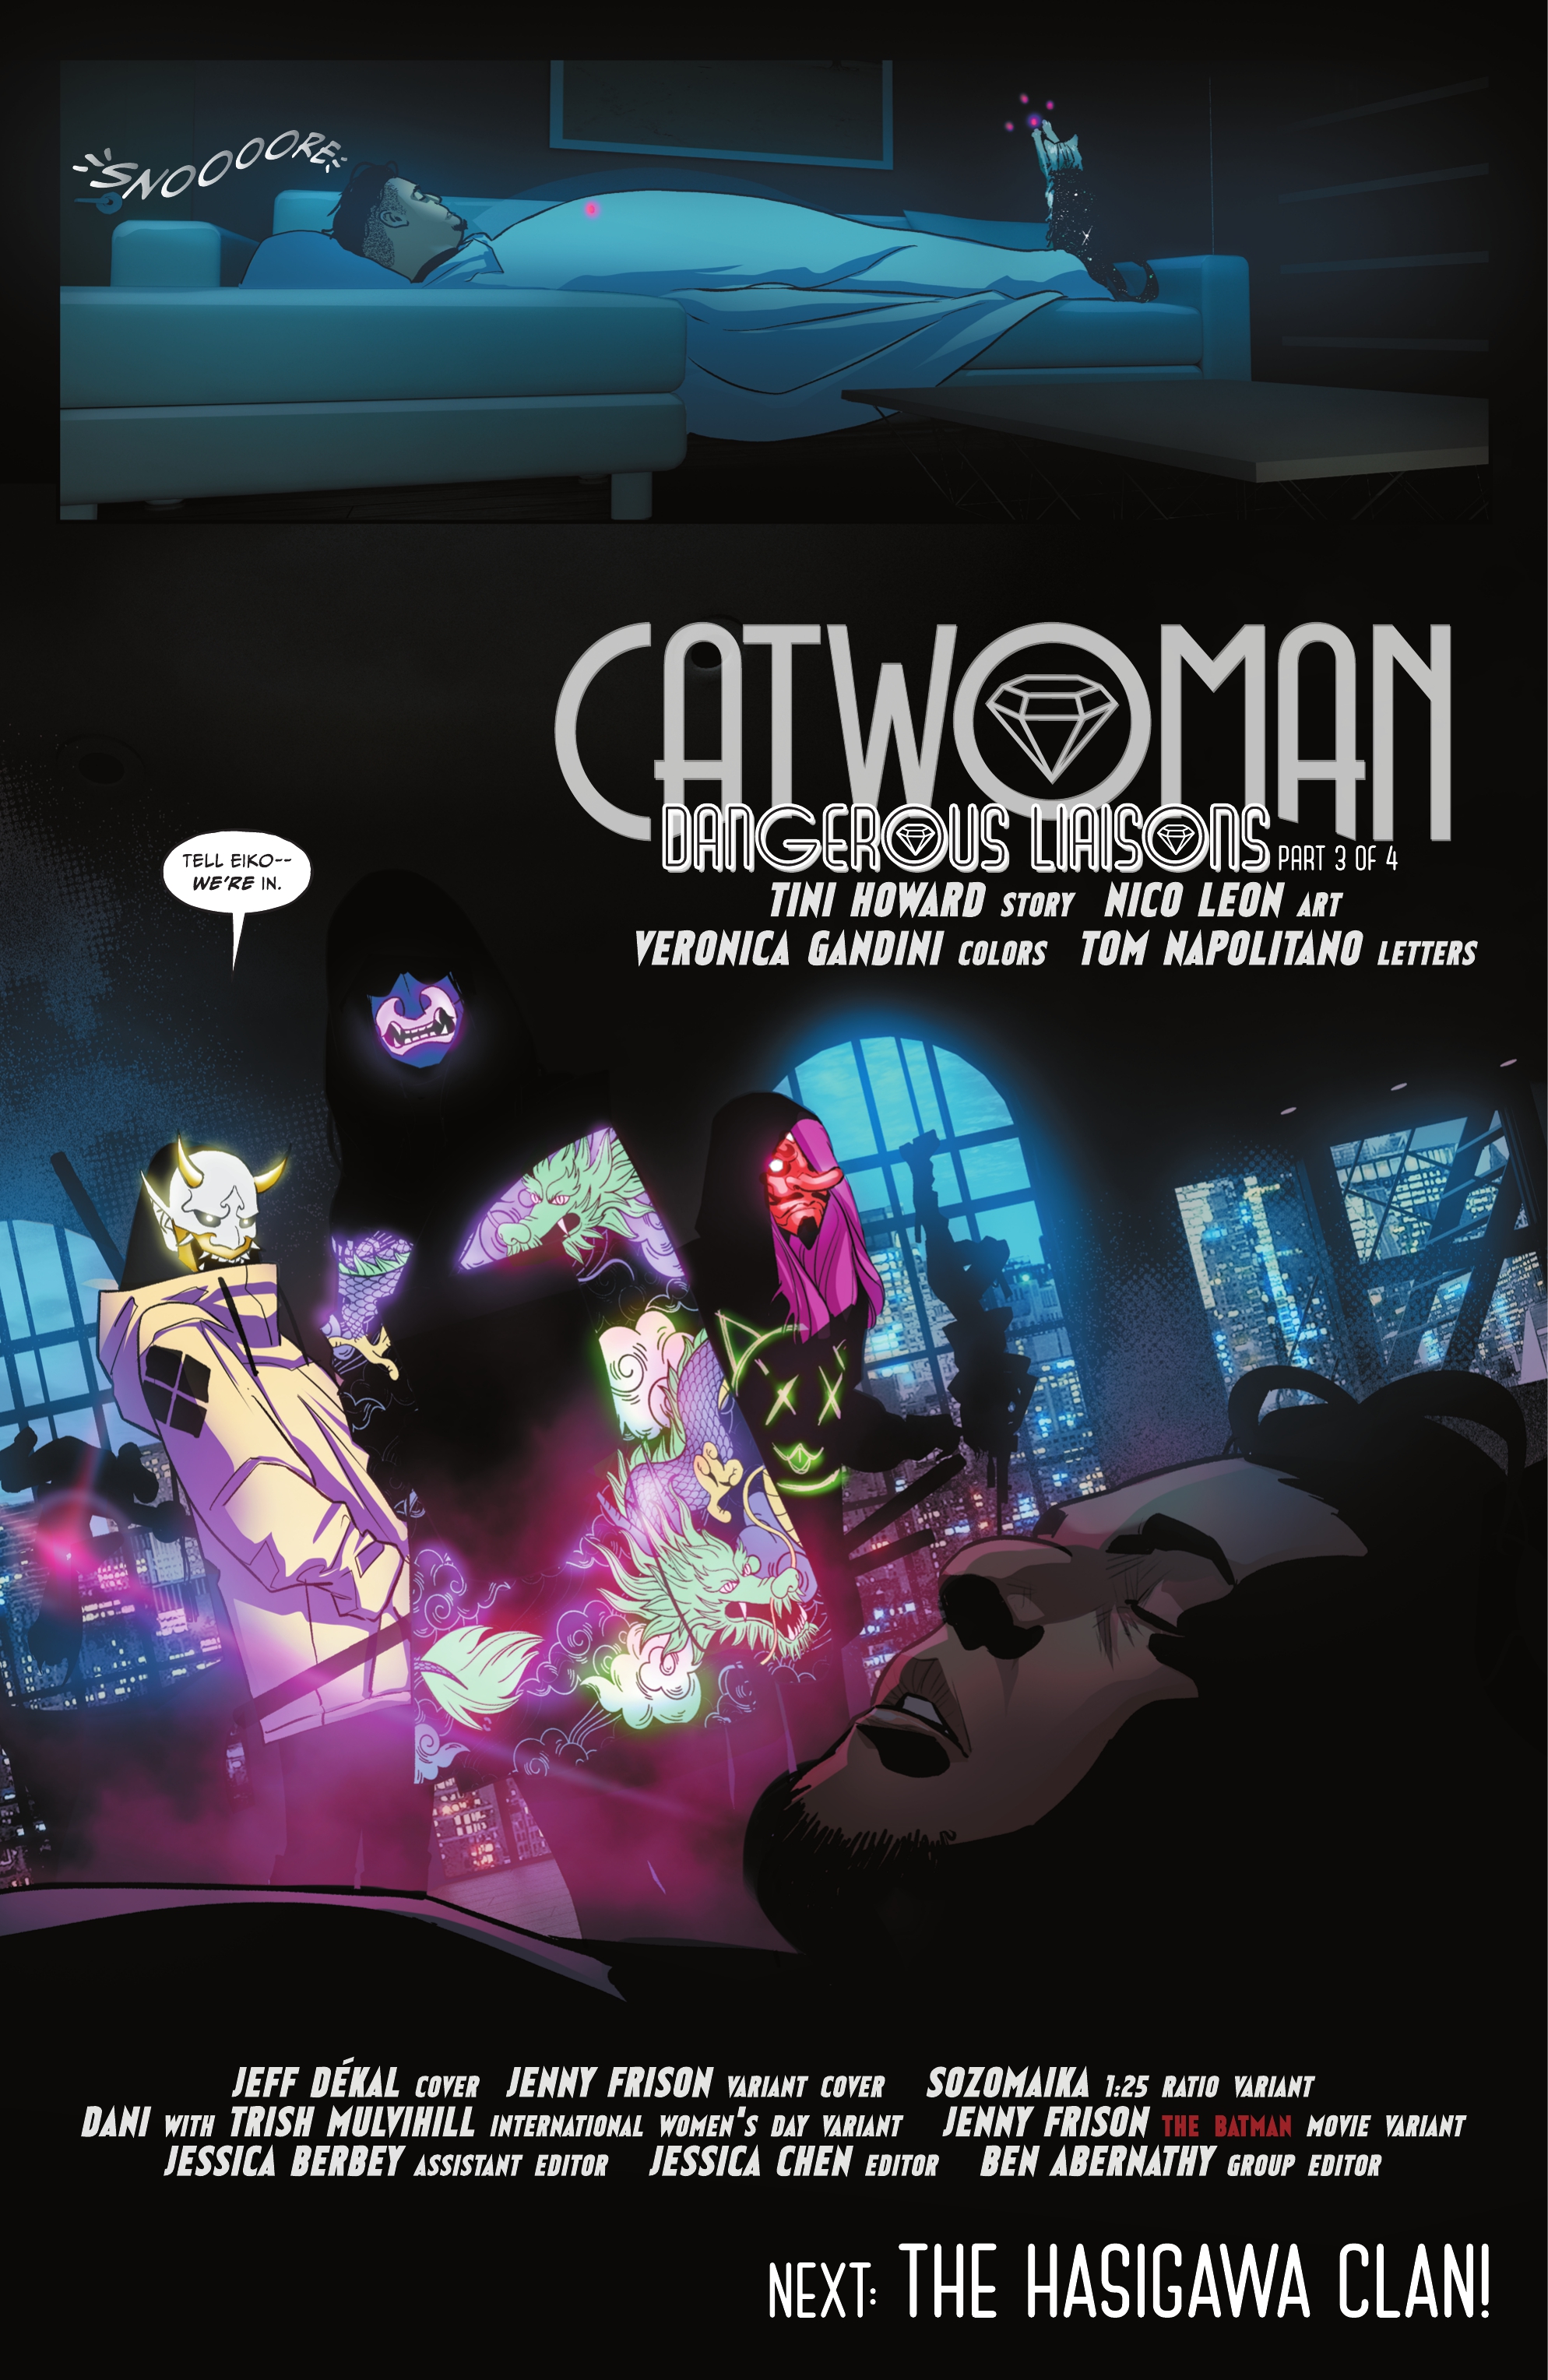 Catwoman 041 023